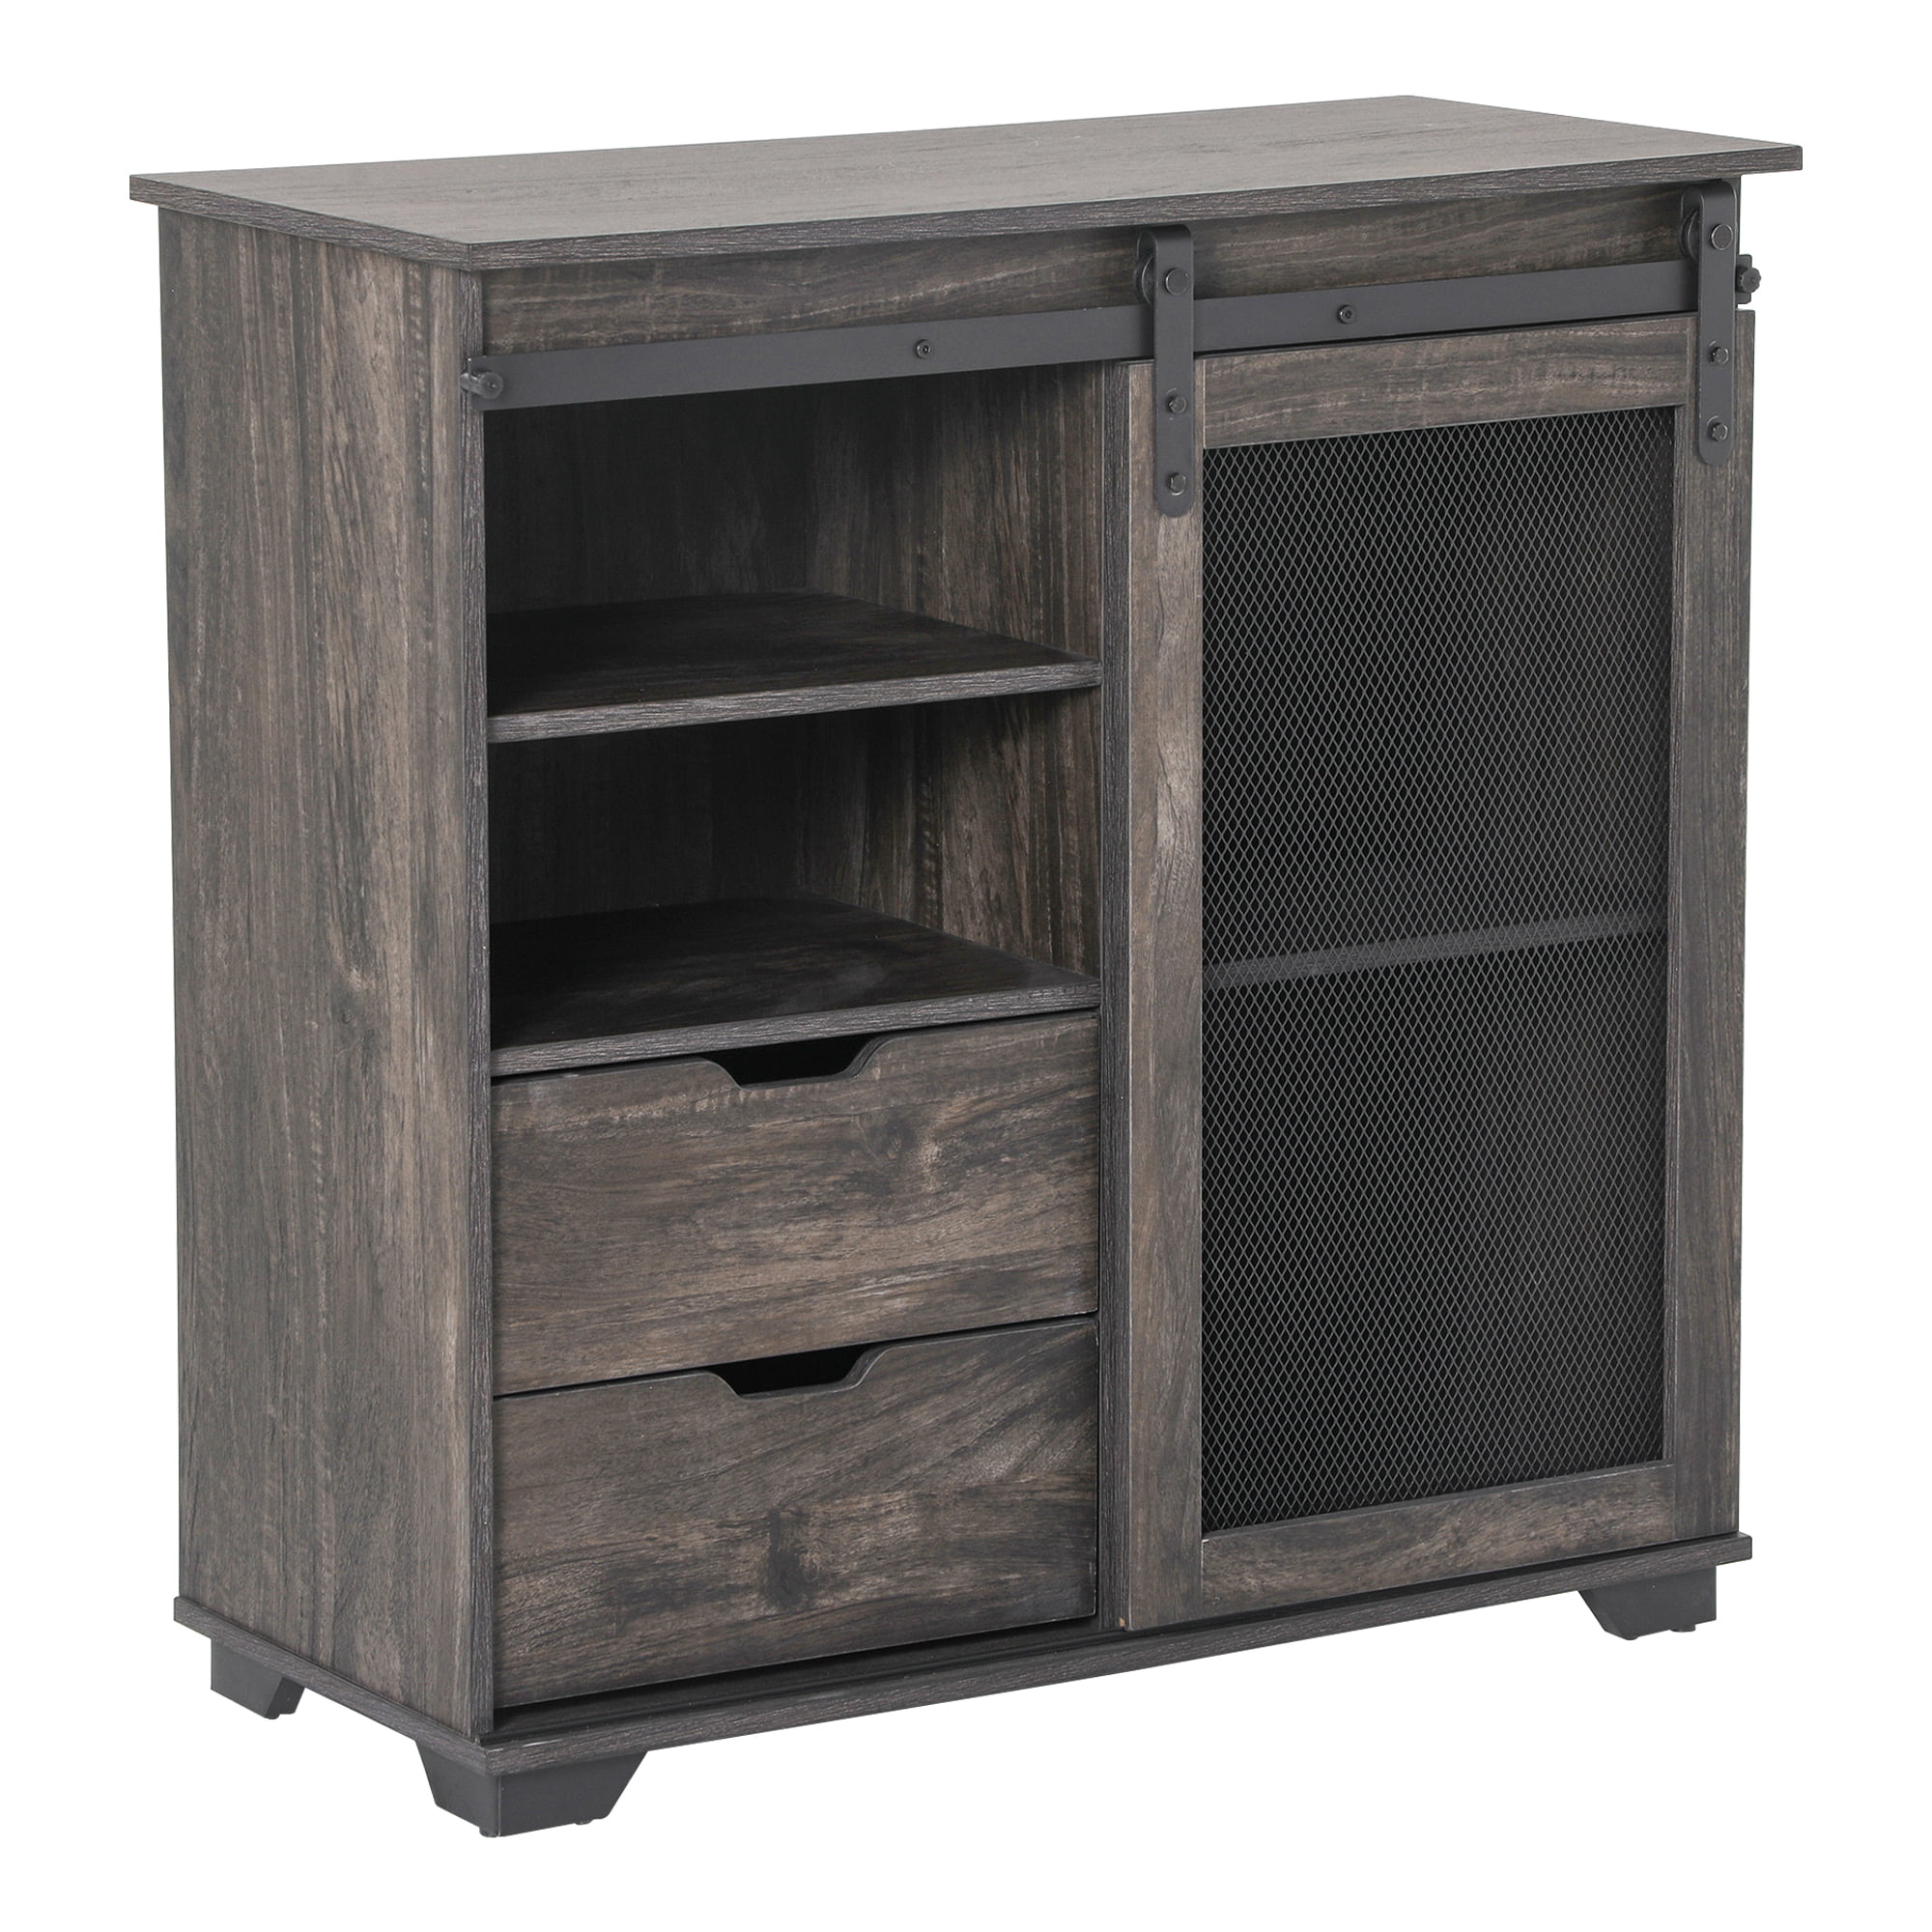 Premium Corona Grey Washed Wine Rack in Solid Pine with Dovetailed Drawers